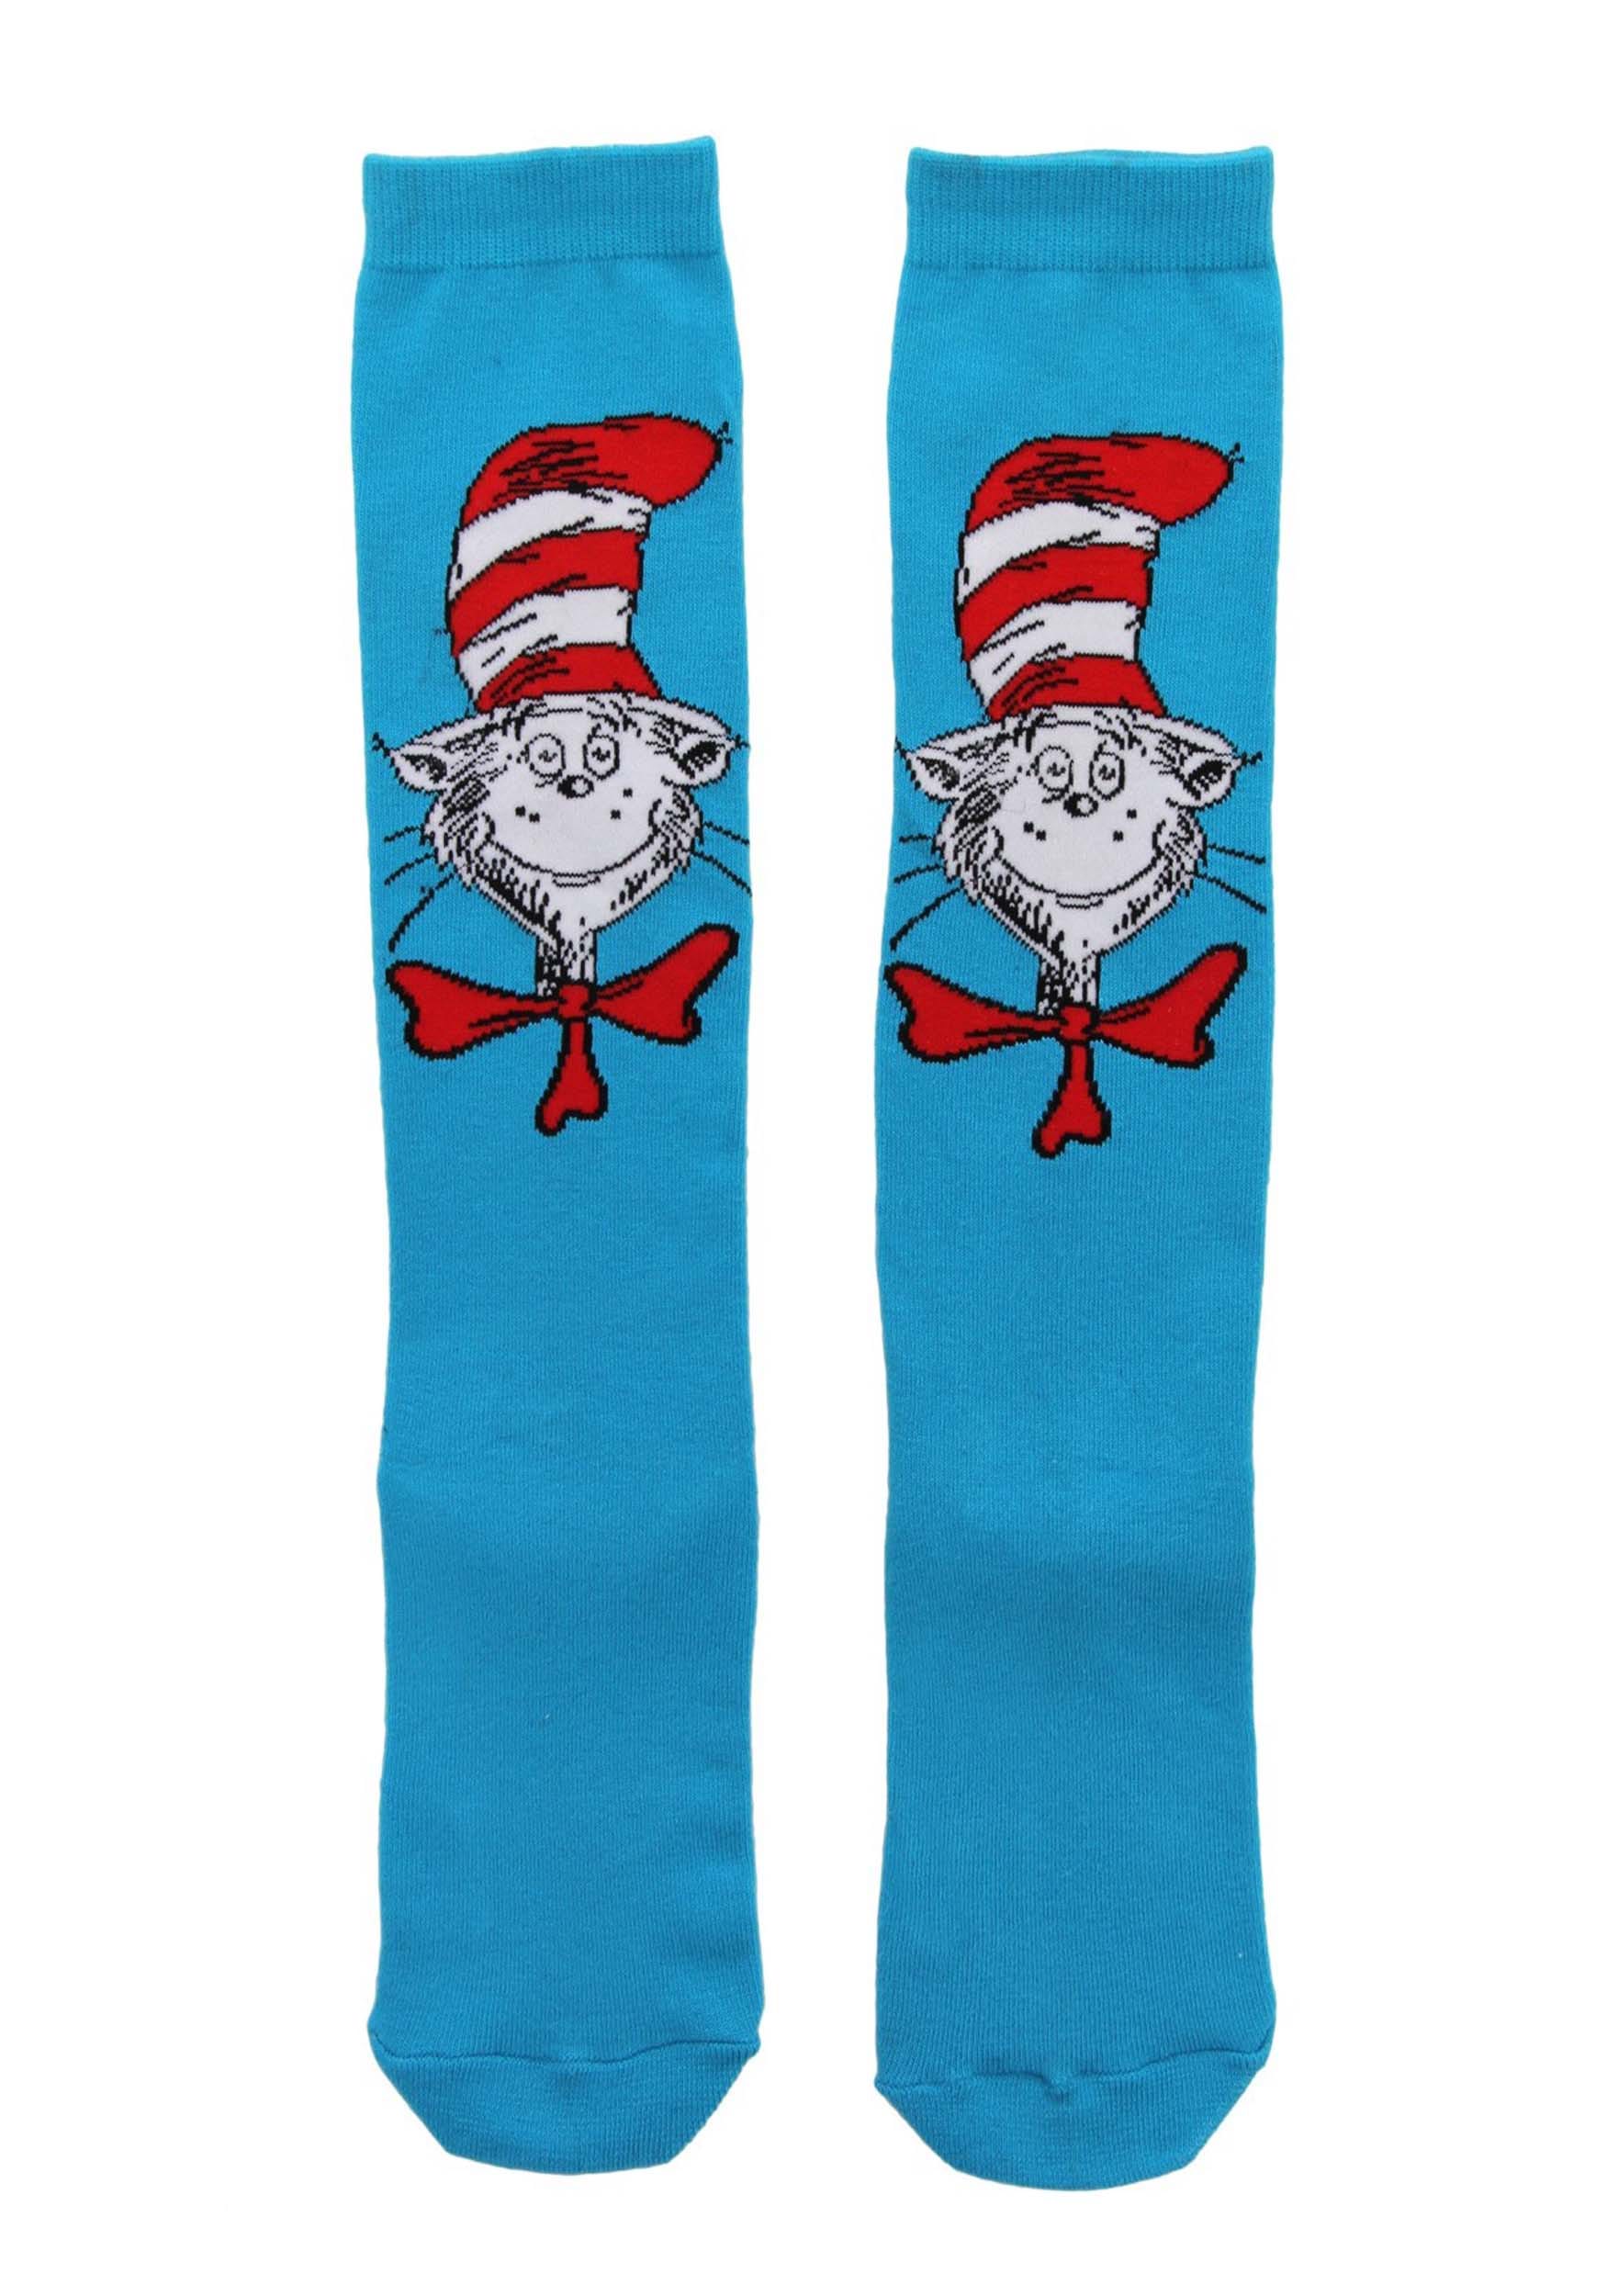 Dr. Seuss The Cat in the Hat Knee High Sock For Women